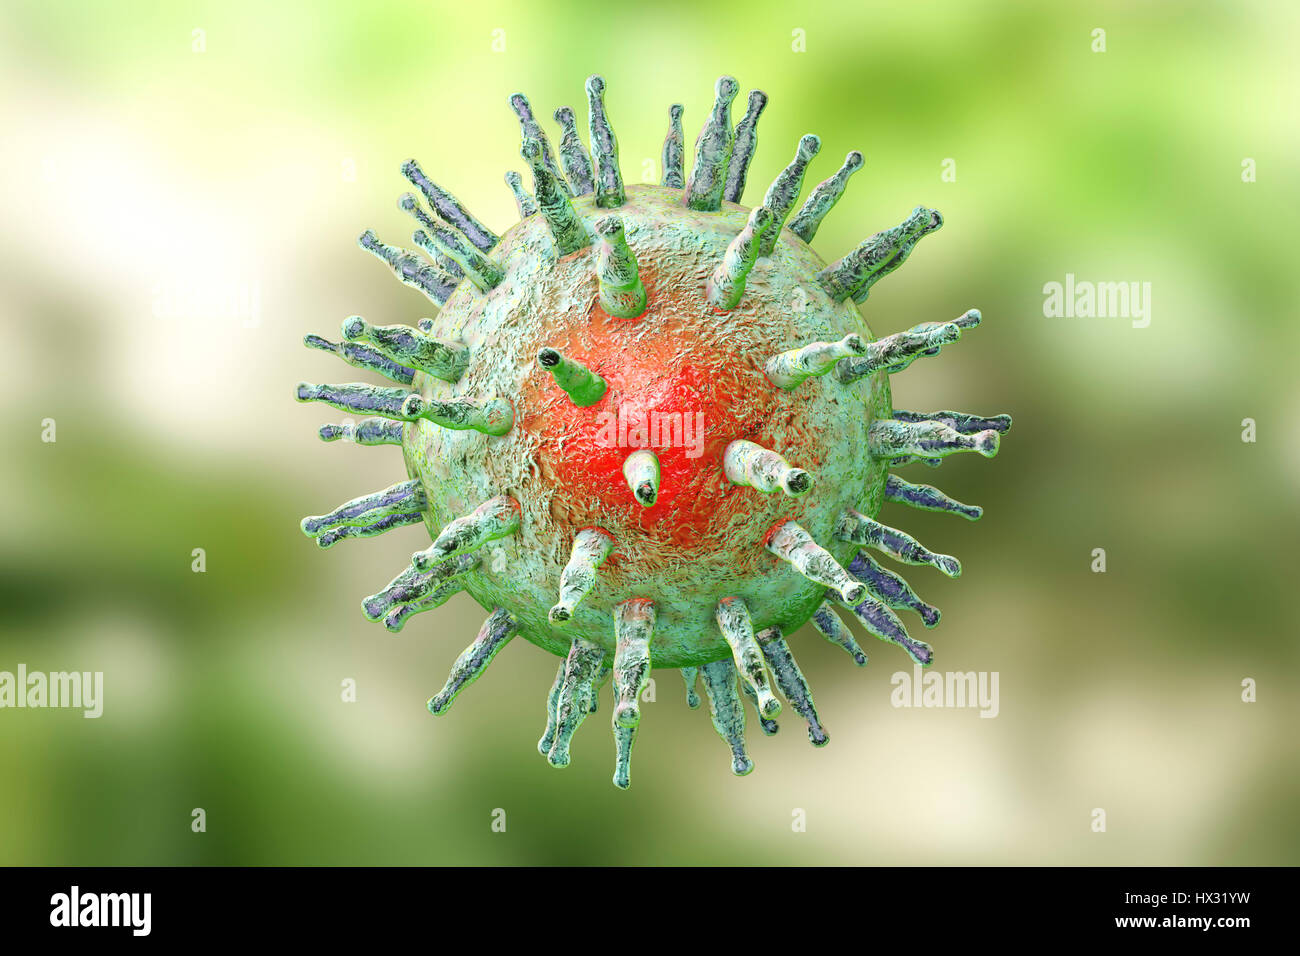 Epstein-Barr virus (EBV) destruction, computer illustration. Conceptual image for EBV infection treatment and prevention. EBV, also known as human herpes virus 4, is 1 of 8 herpes viruses that infects humans. It is best known as the cause of infectious mononucleosis (glandular fever), but is also associated with some forms of cancer, including Burkitt's lymphoma. In both infections, the virus infects one type of white blood cell, B lymphocytes. Infection with EBV is common and usually harmless; additional factors potentiate the development of more serious diseases. Stock Photo